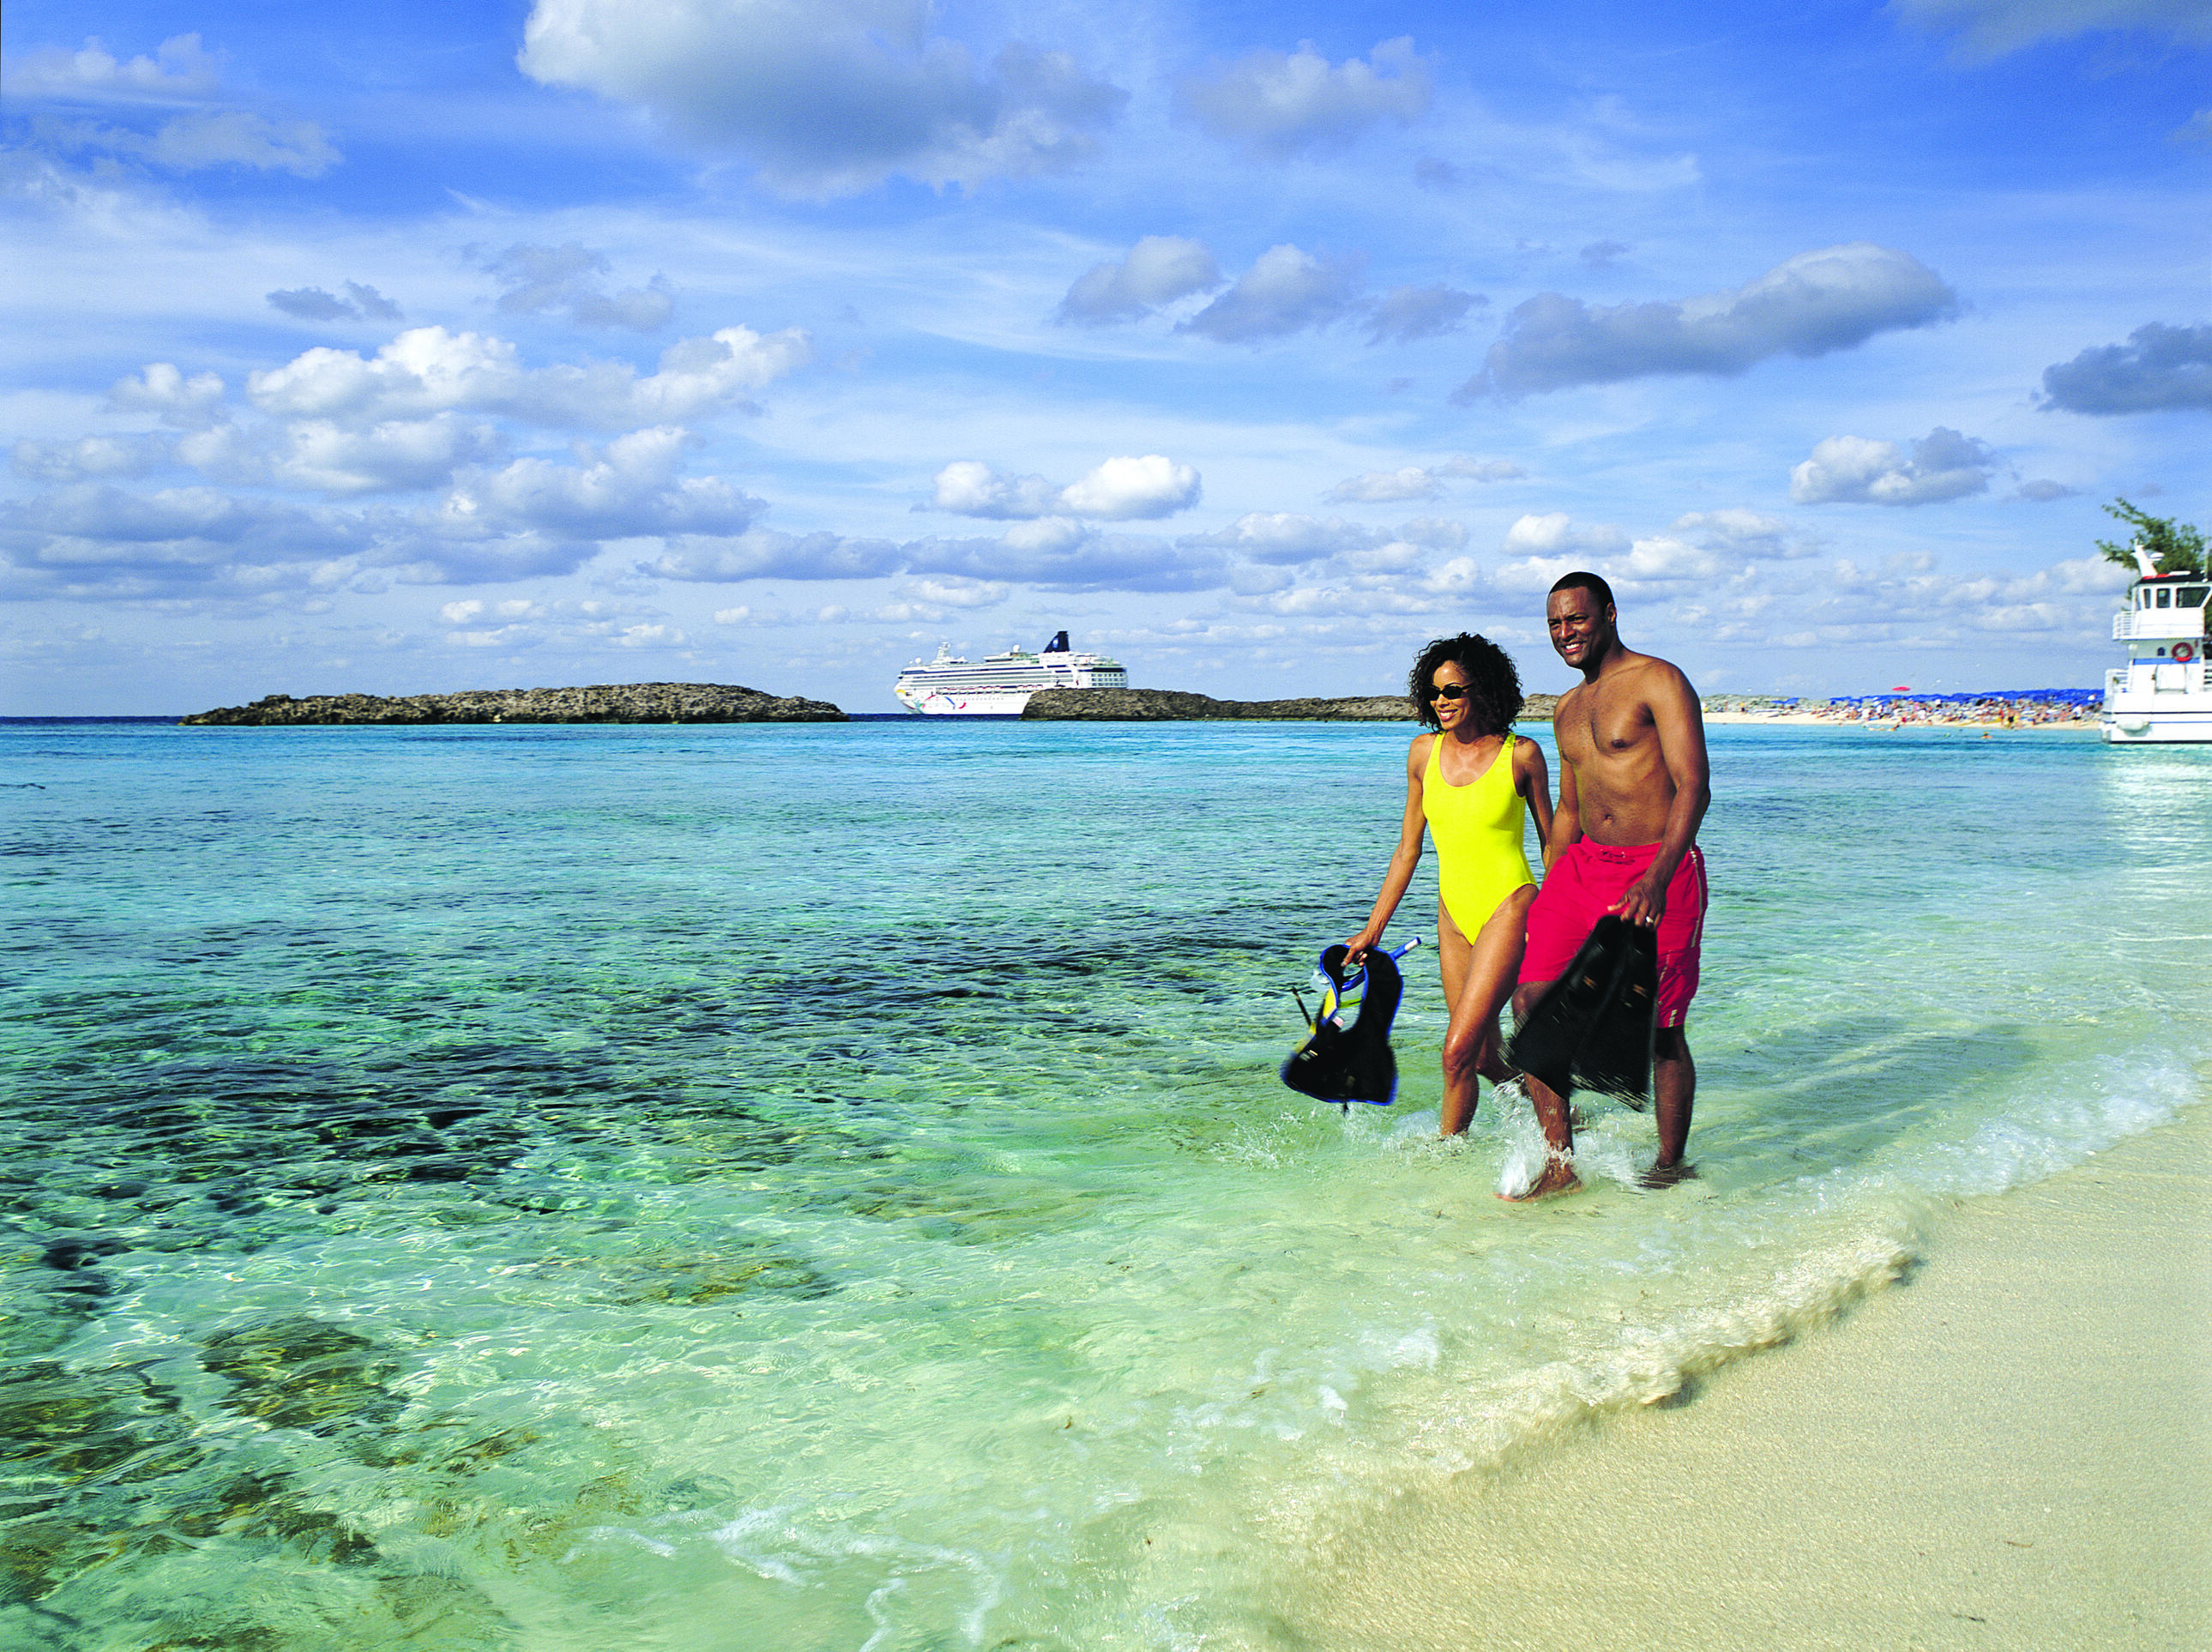 9 Best Cruise Lines For Couples A Guide to Romantic Cruises